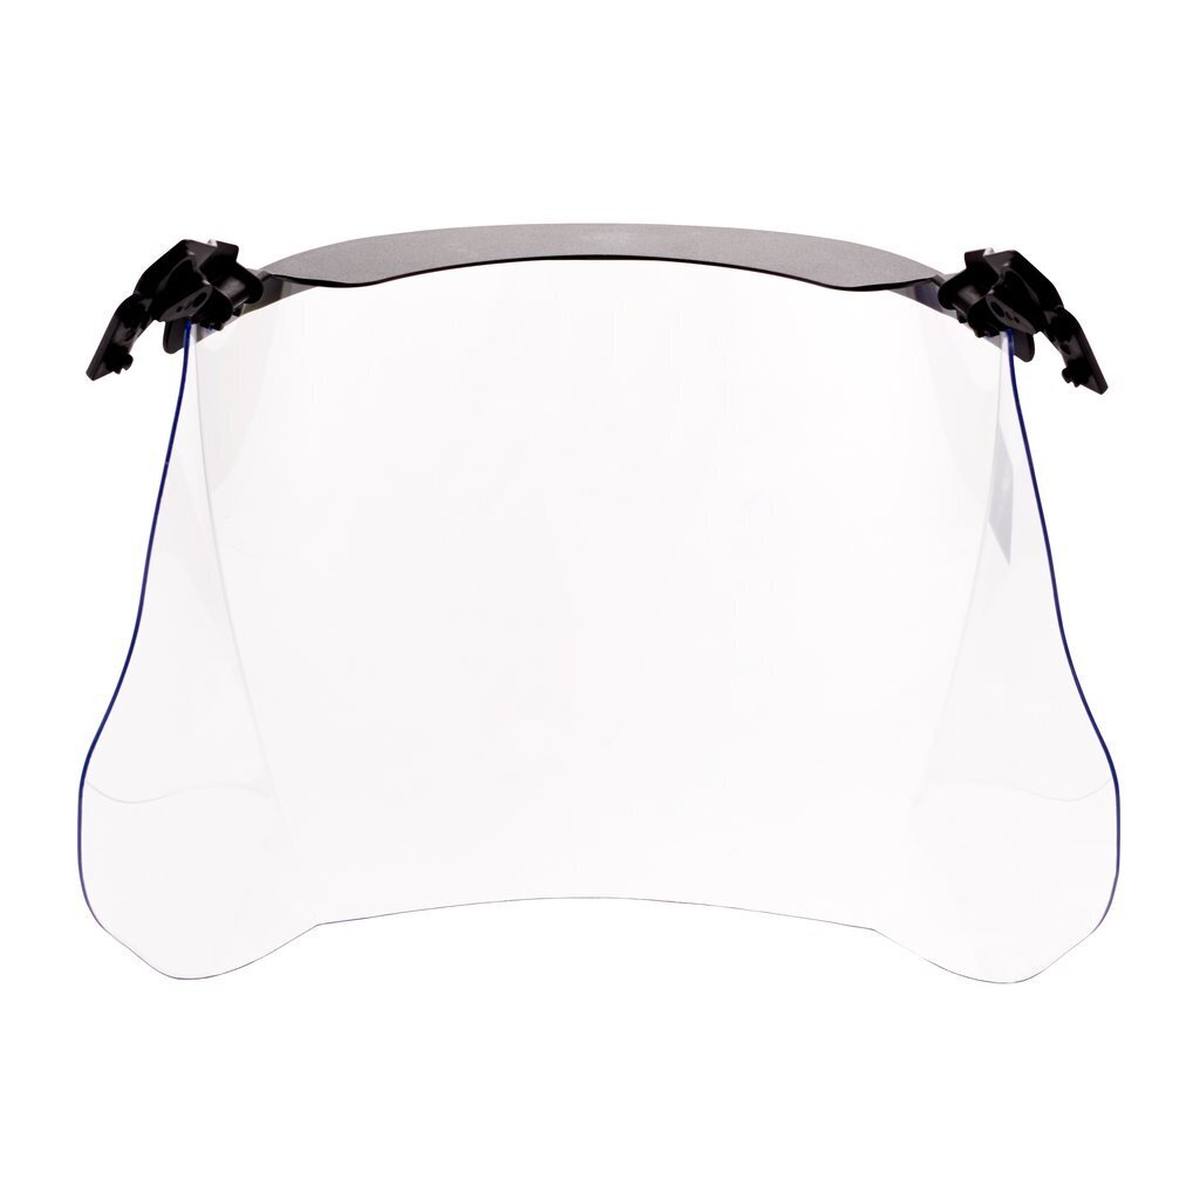 3M V4KK clear visor polycarbonate with sun shield short extremely impact and scratch resistant Thickness: 1.5 mm, weight: 180g (including helmet mount)